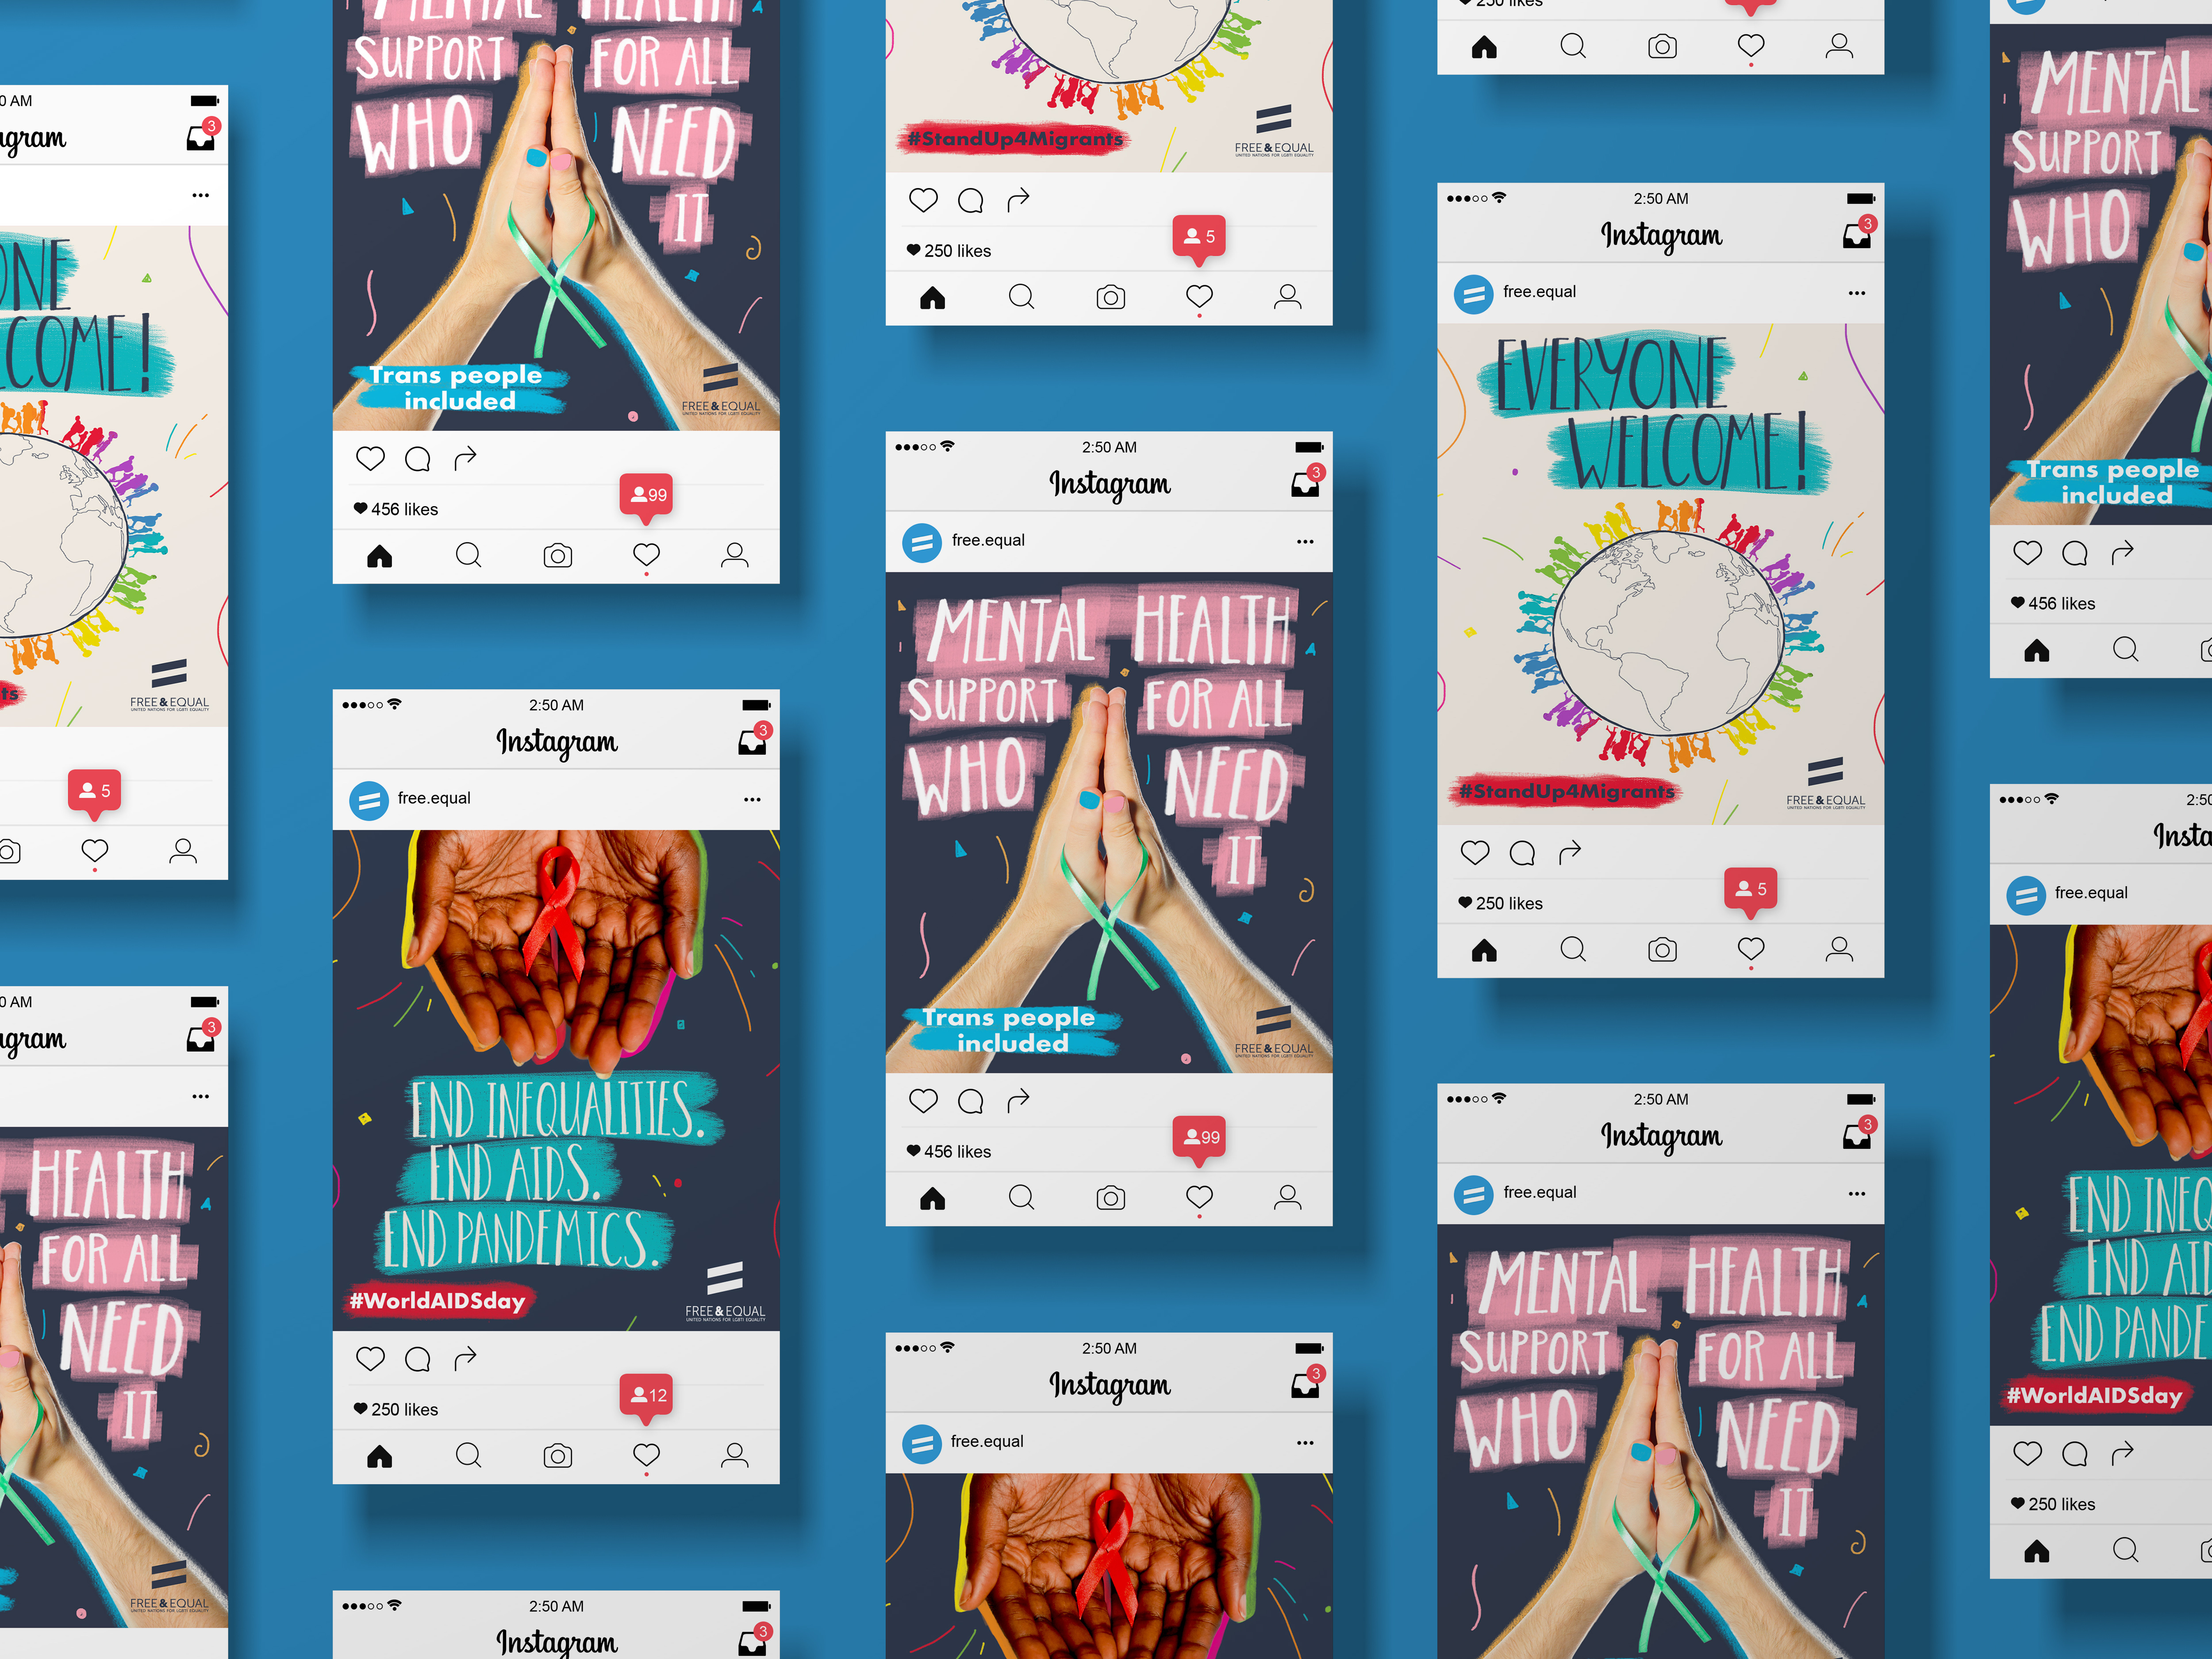 An image of different social posts highlighting the Free and Equal campaign.